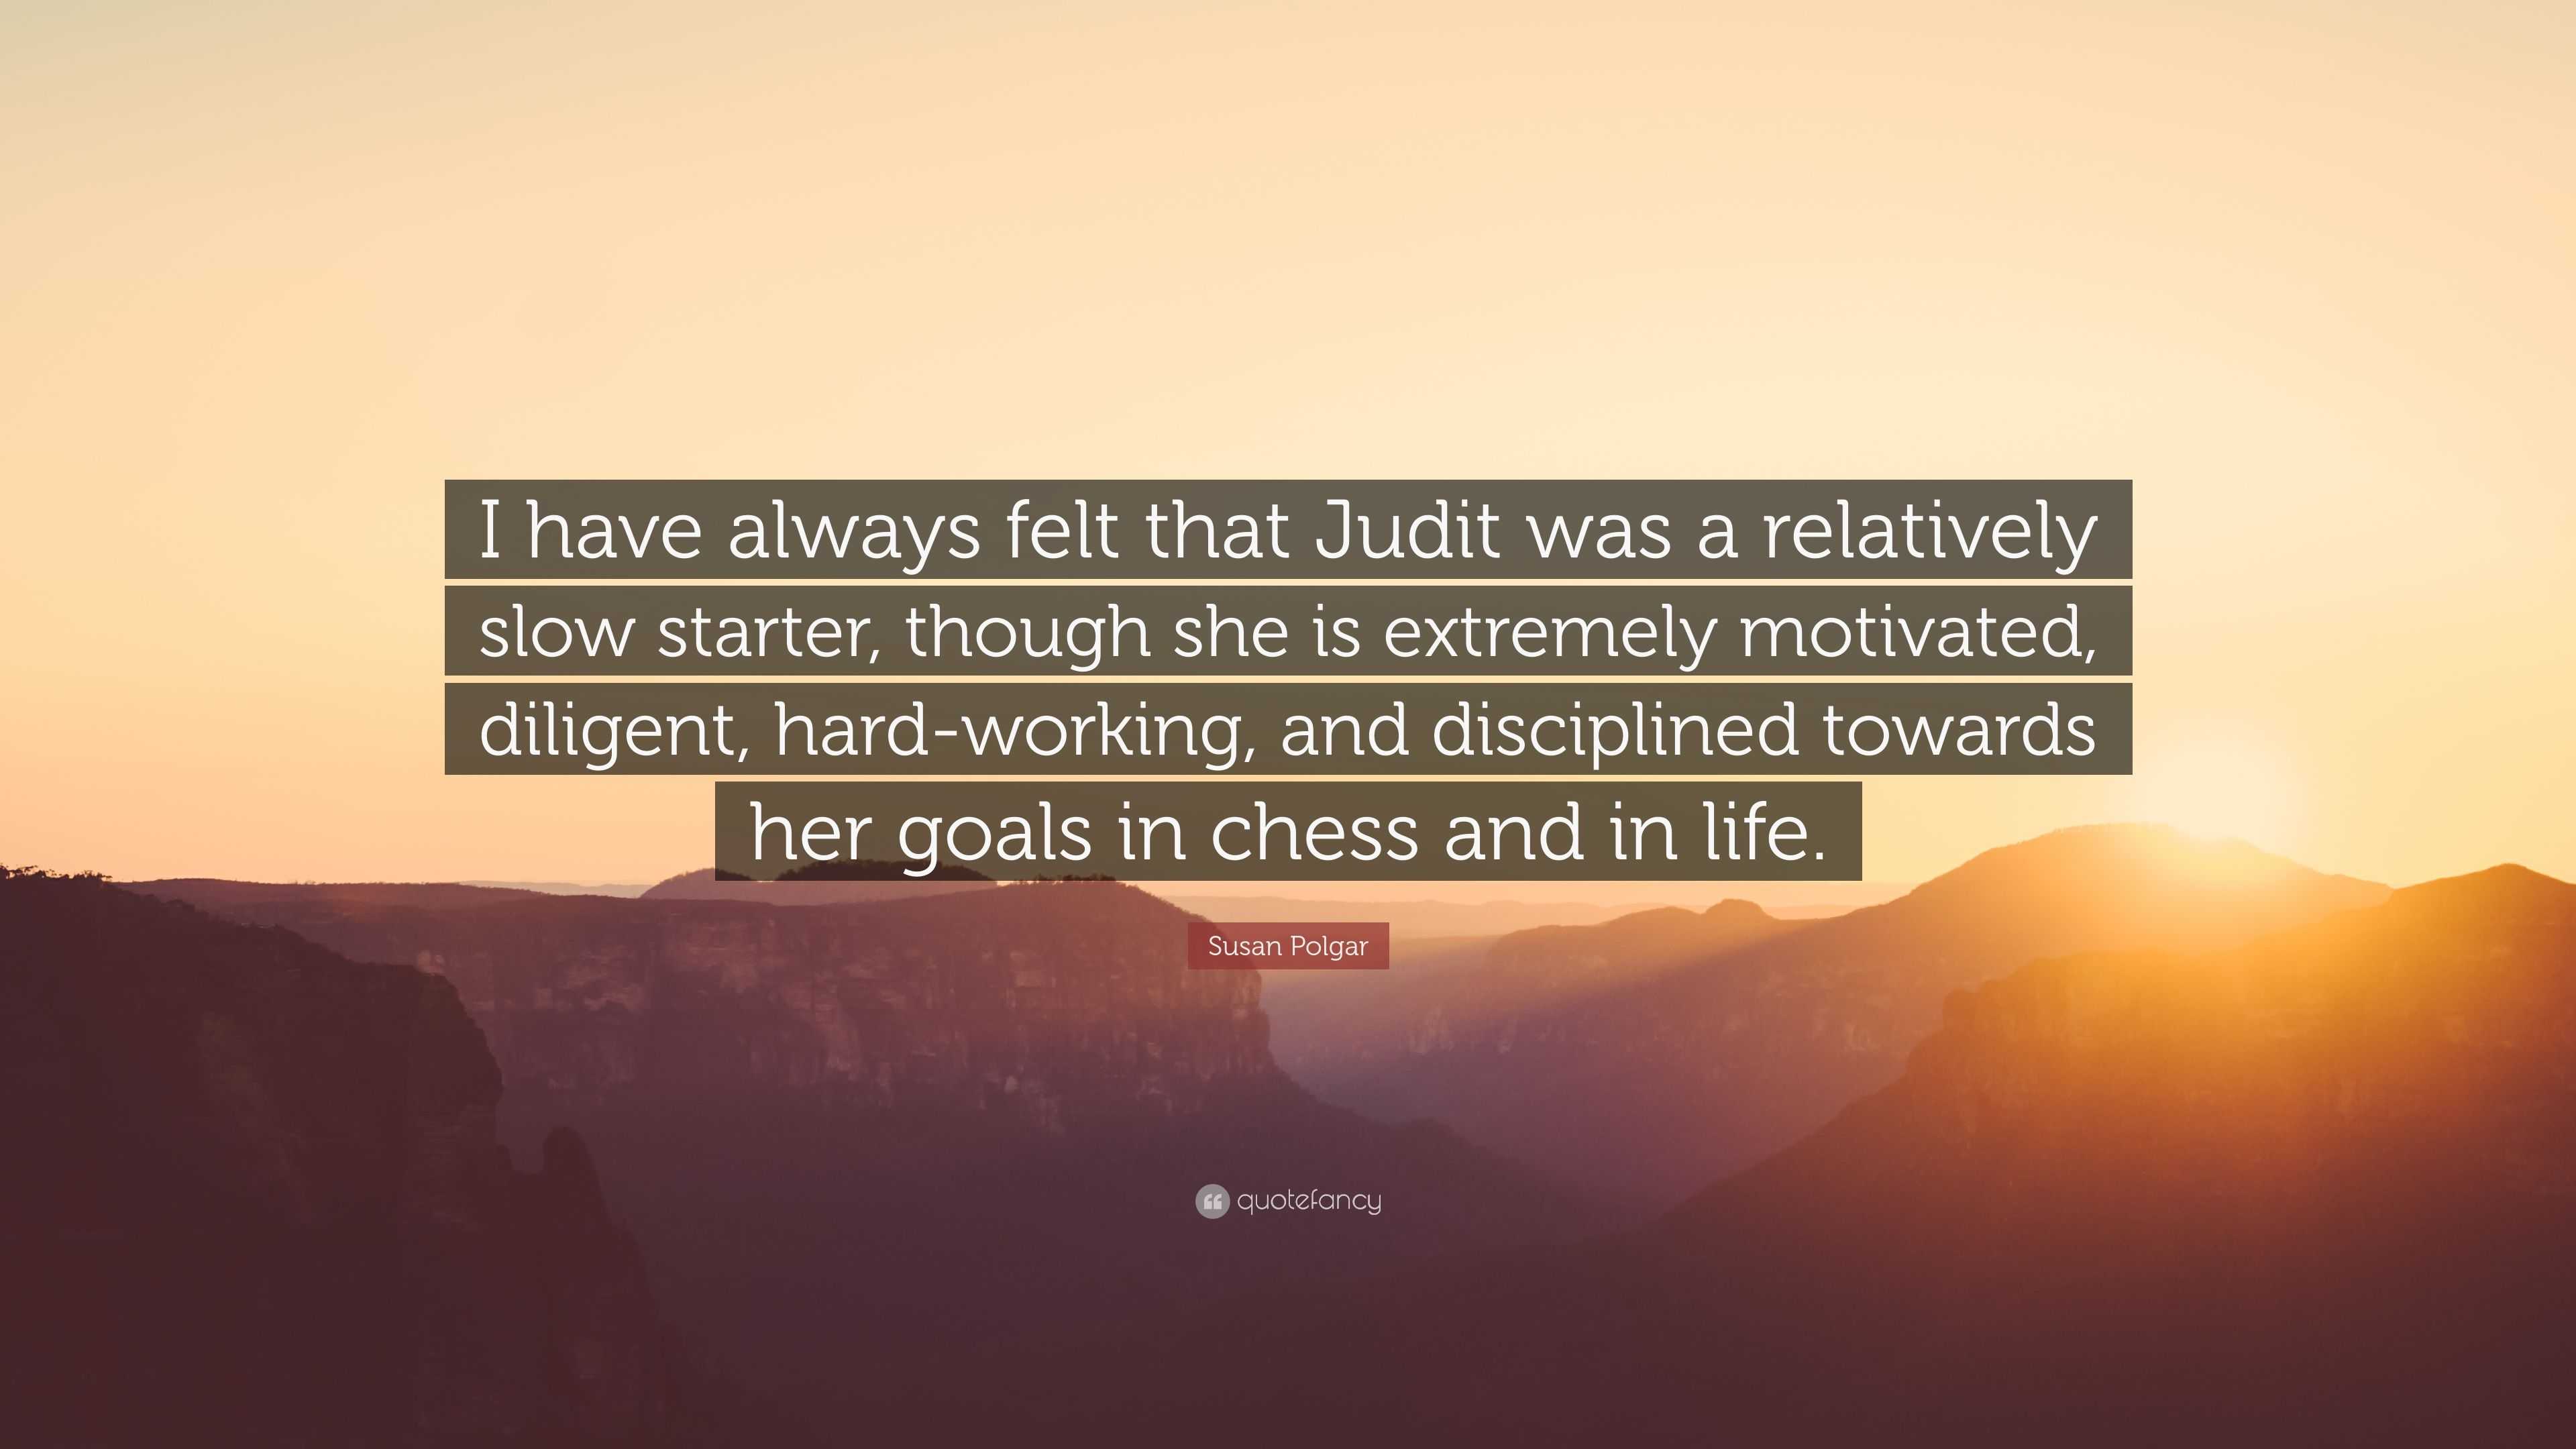 Susan Polgar Quote: “I have always felt that Judit was a relatively slow  starter, though she is extremely motivated, diligent, hard-working, ”